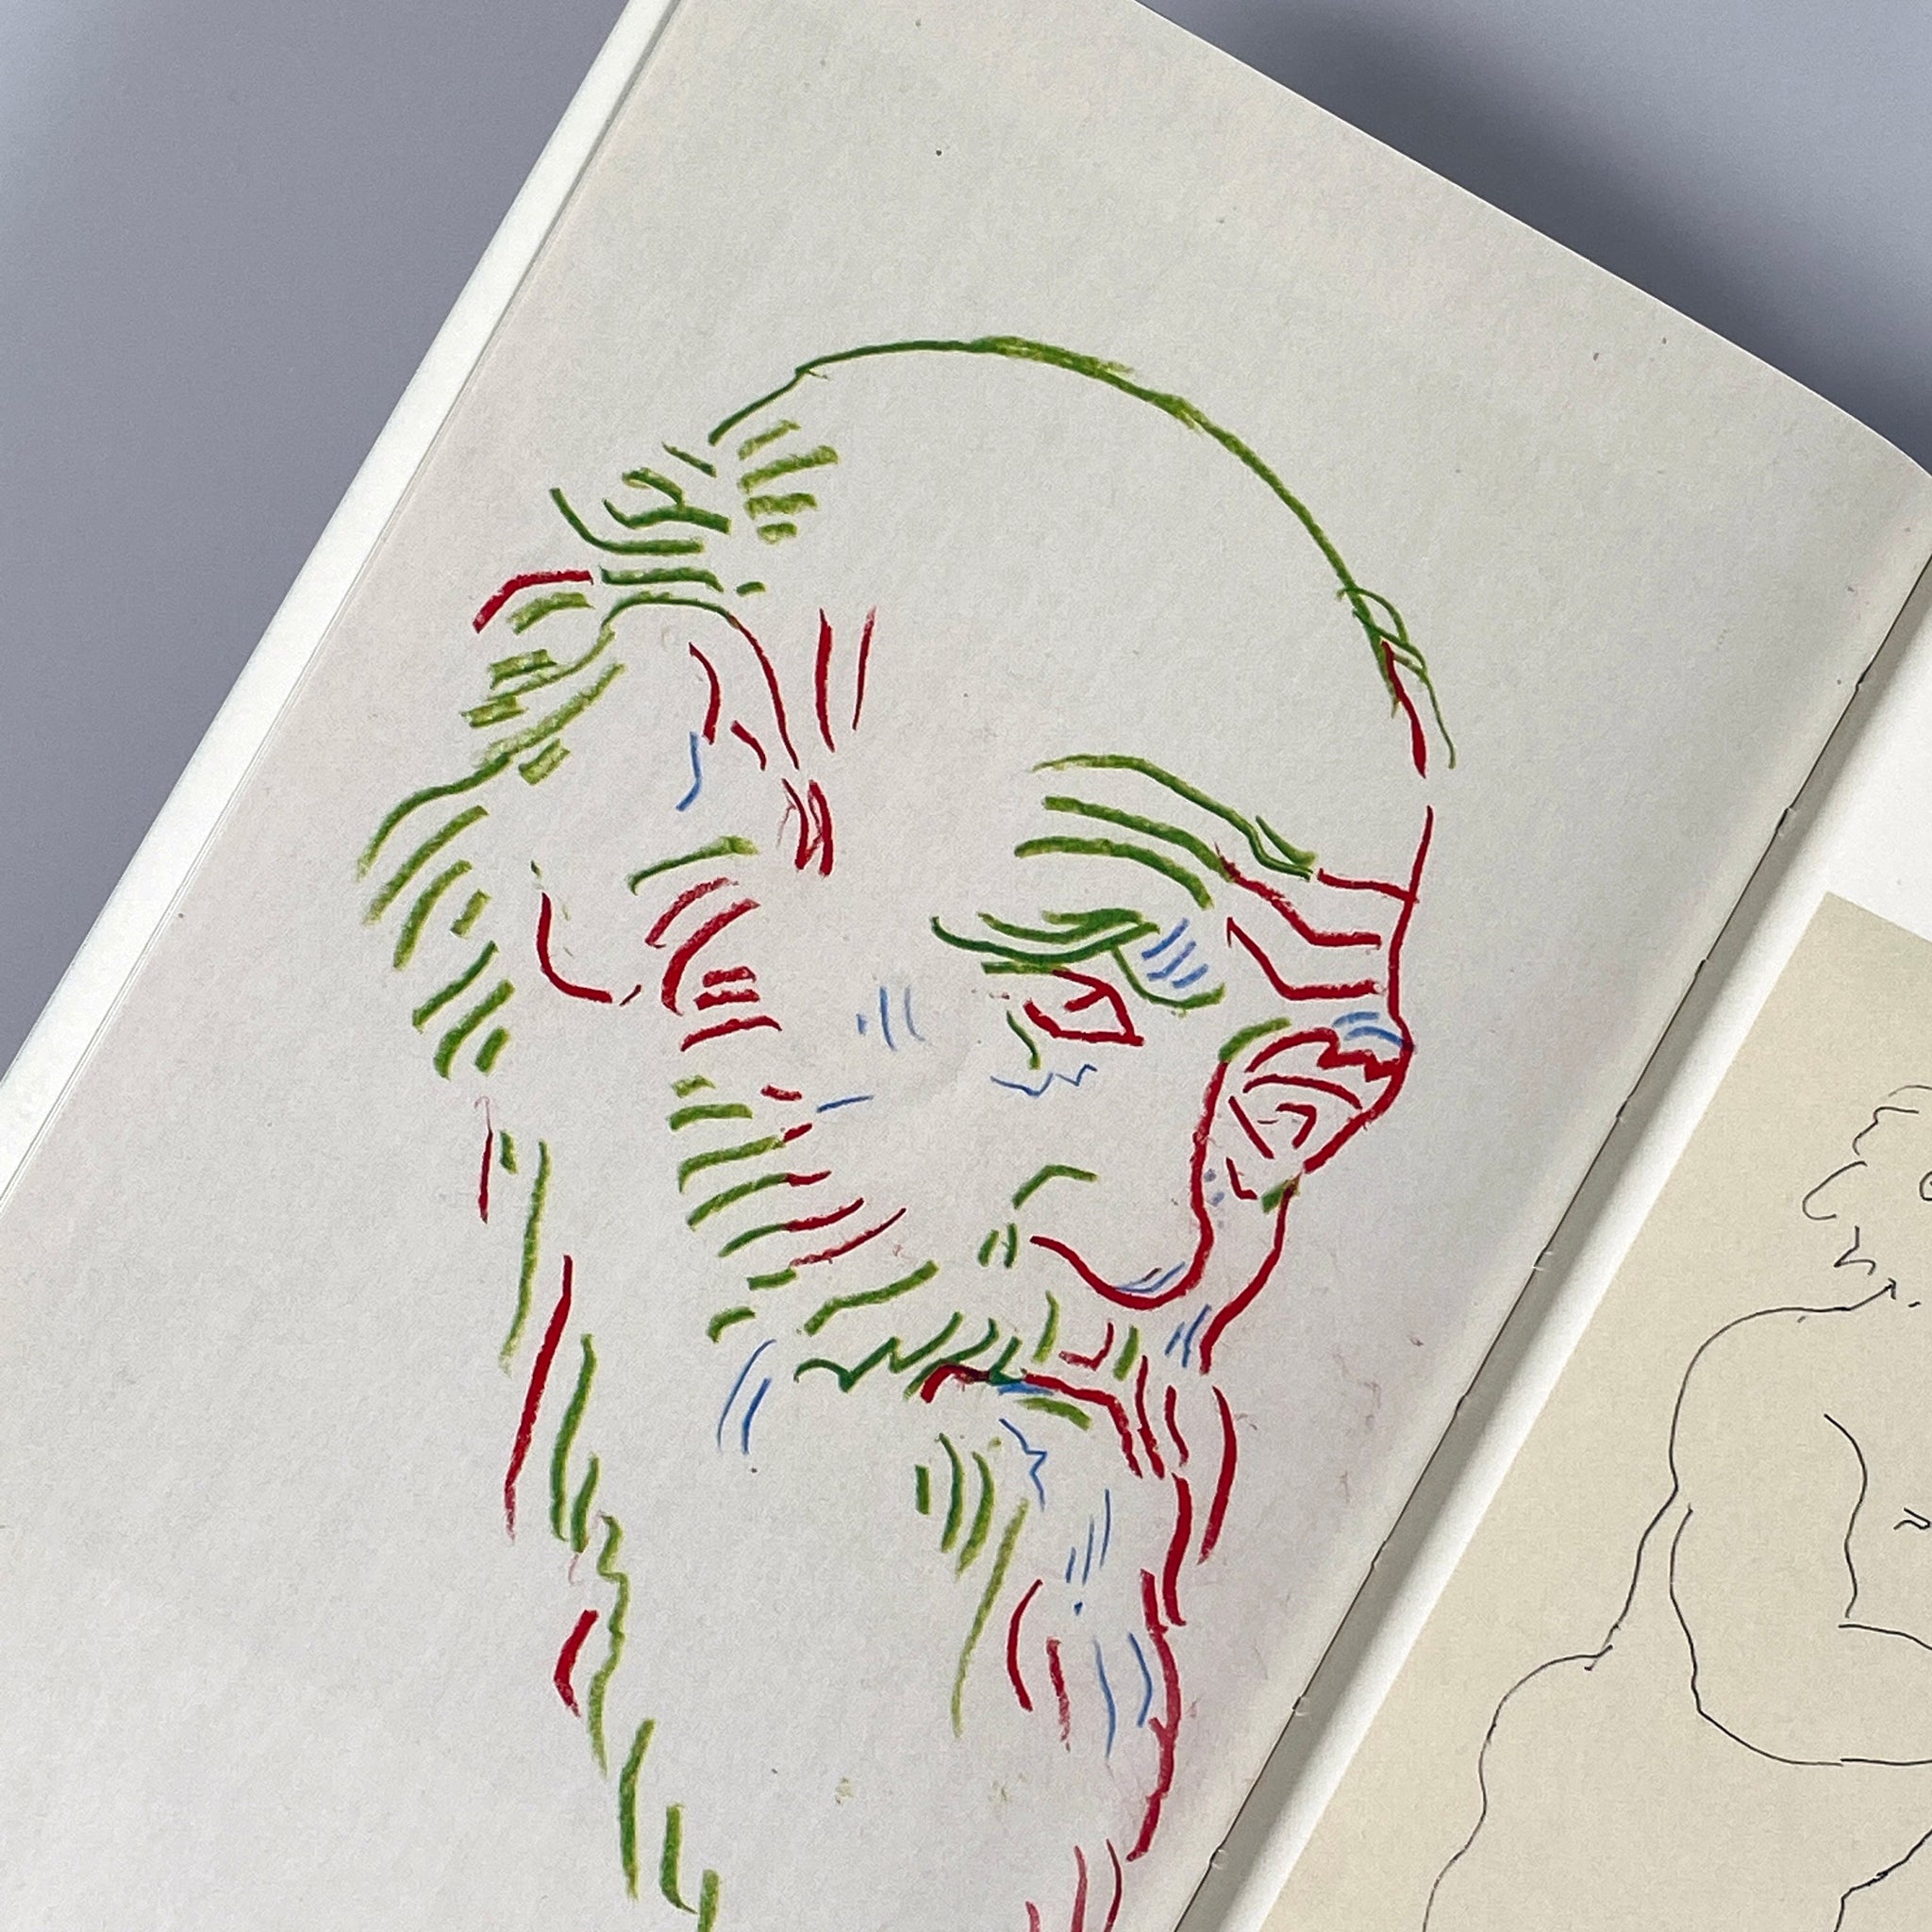 Milton Glaser: Inspiration and Process in Design